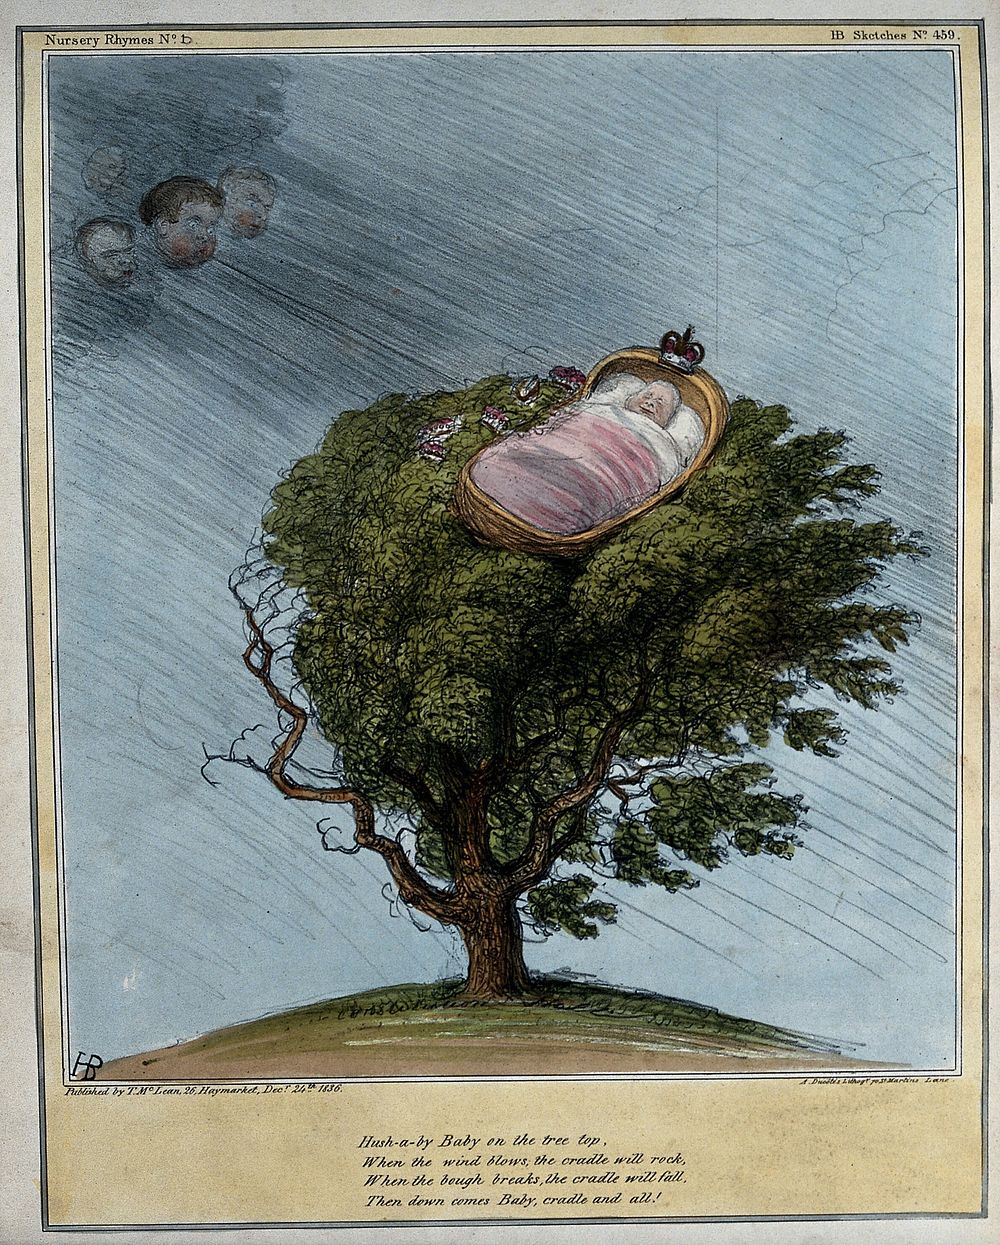 Precariously perched on the top of a tree, William IV is sleeping in a cradle, the faces of Lord John Russell, Daniel…